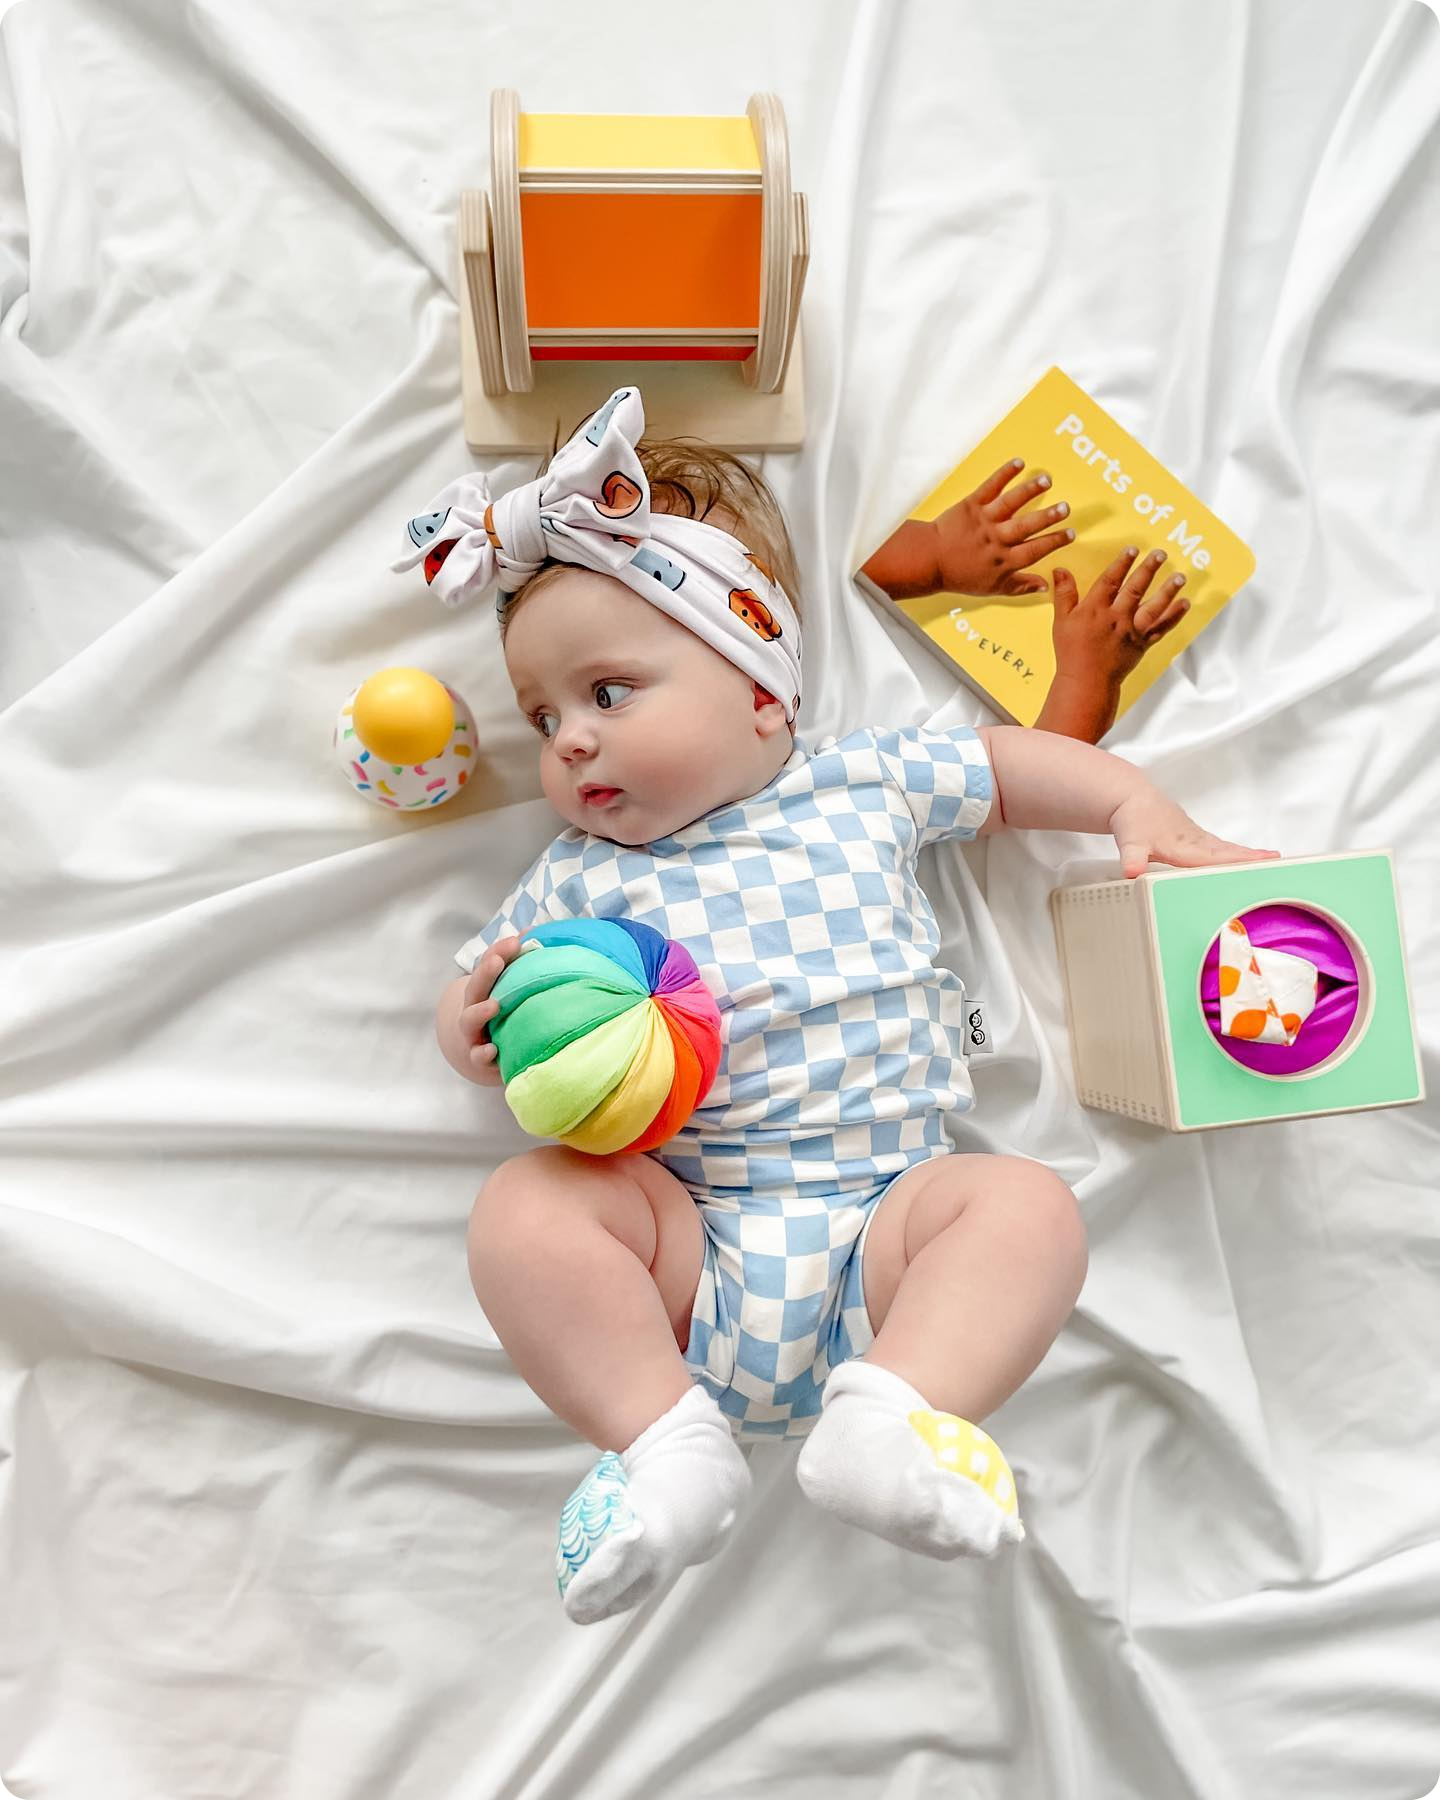 Baby laying with several playthings from The Senser Play Kit